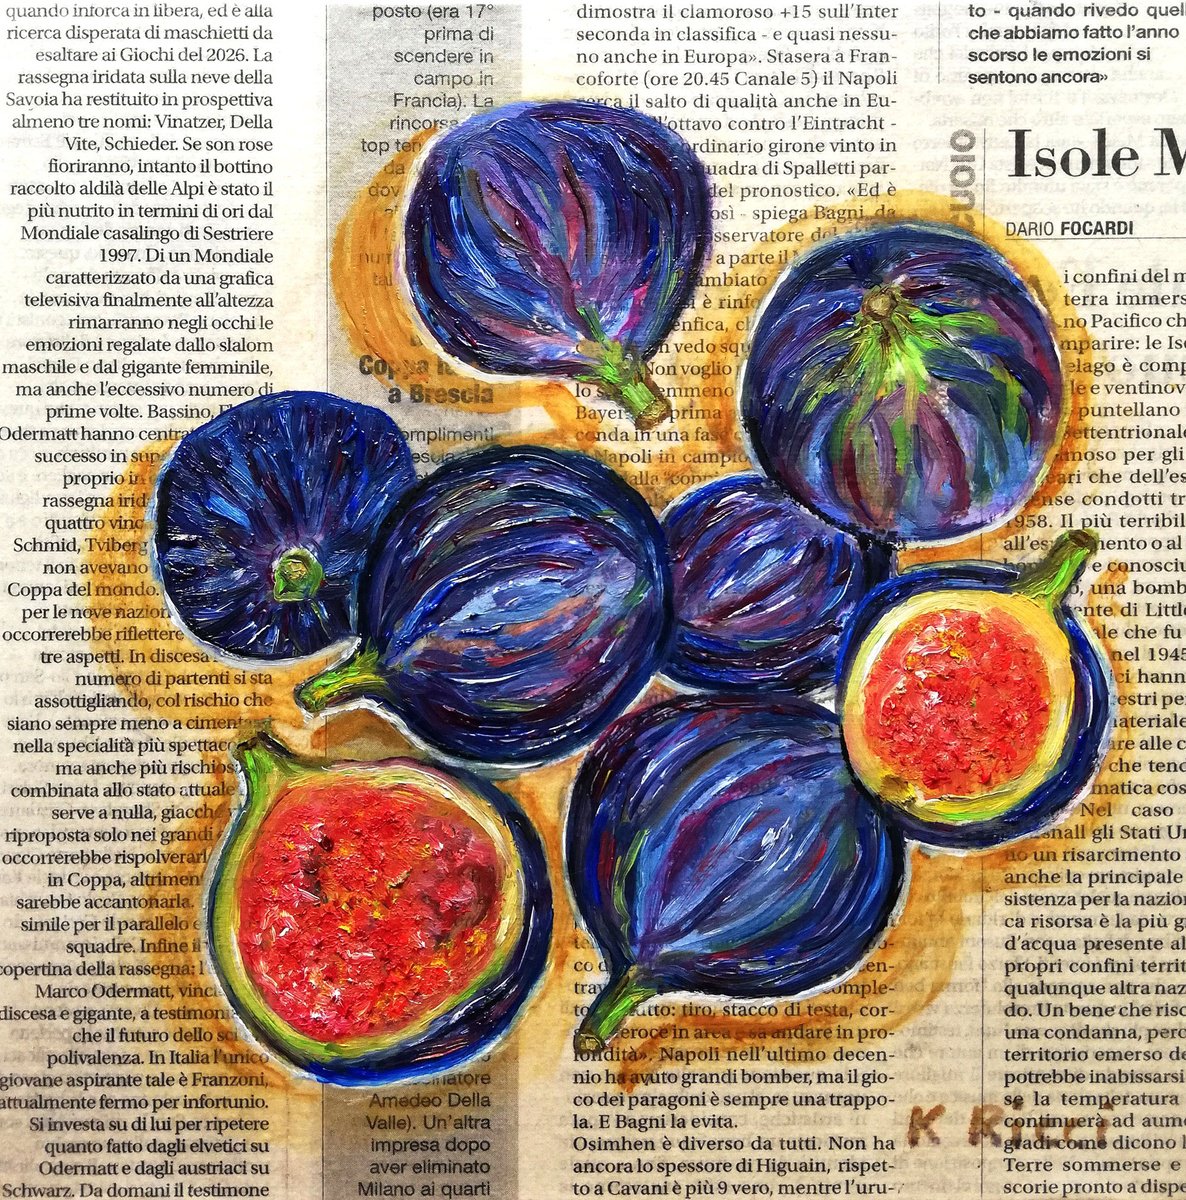 Figs on Newspaper Original Oil on Canvas Board Painting 8 by 8 inches (20x20 cm) by Katia Ricci